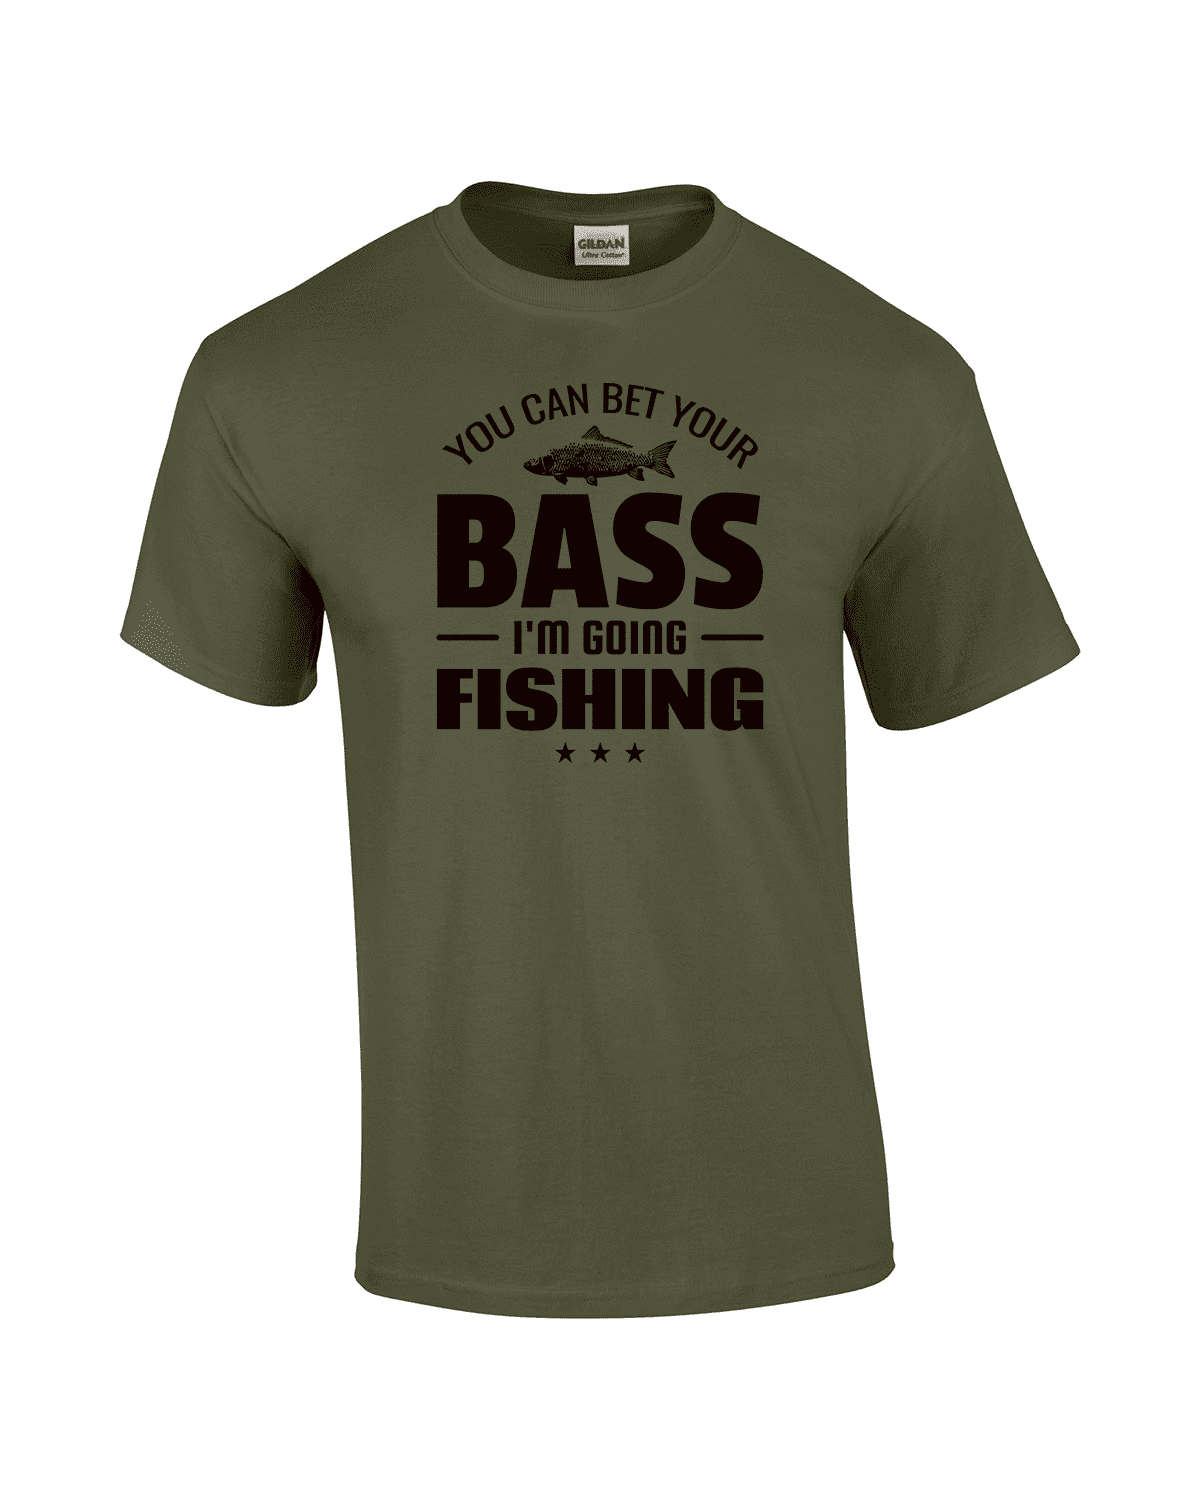 You Can Bet Your Bass I'm Going Fishing Funny Fisherman Fishing Event  Outside Short Sleeve Adult Unisex Graphic T-Shirt-Military-small 